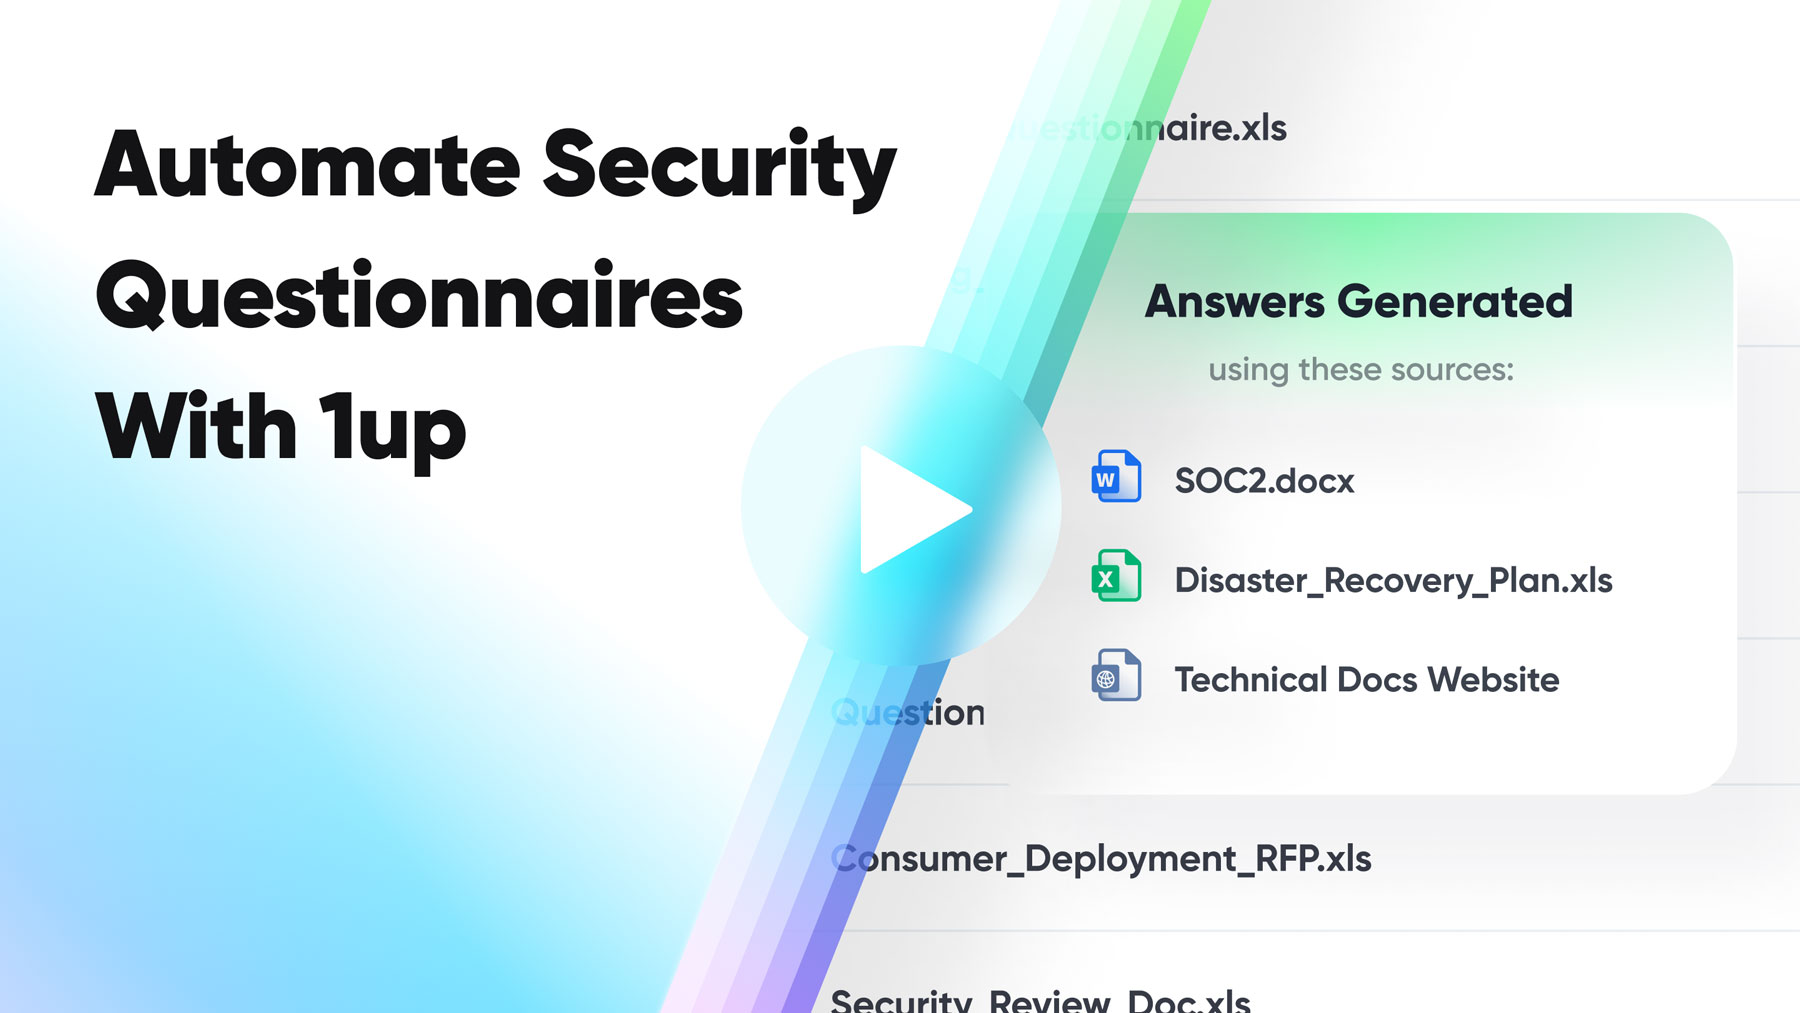 How to Automate Security Questionnaire Responses